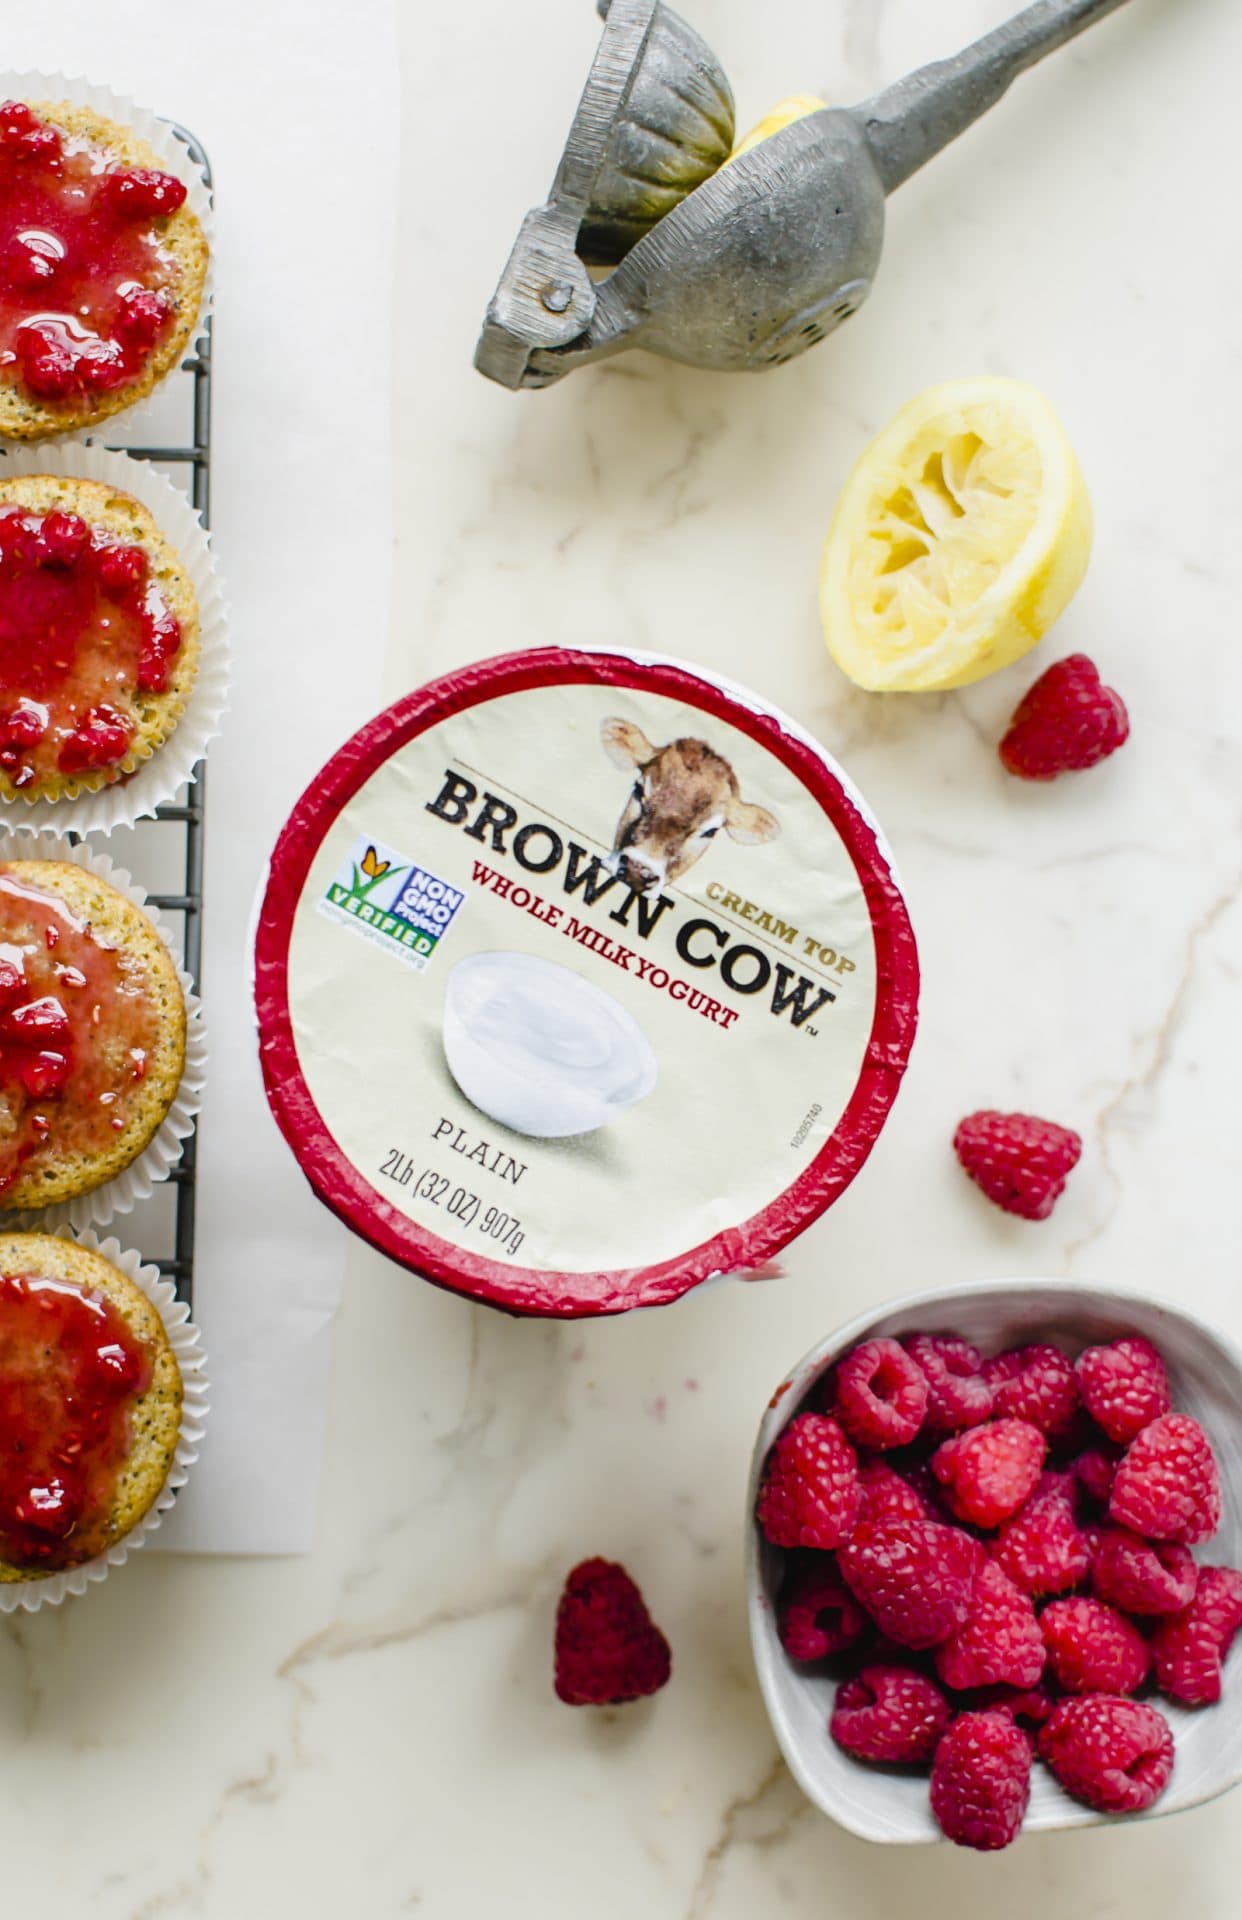 An overhead shot of a container of Brown Cow yogurt with muffins and a bowl of raspberries on the side.